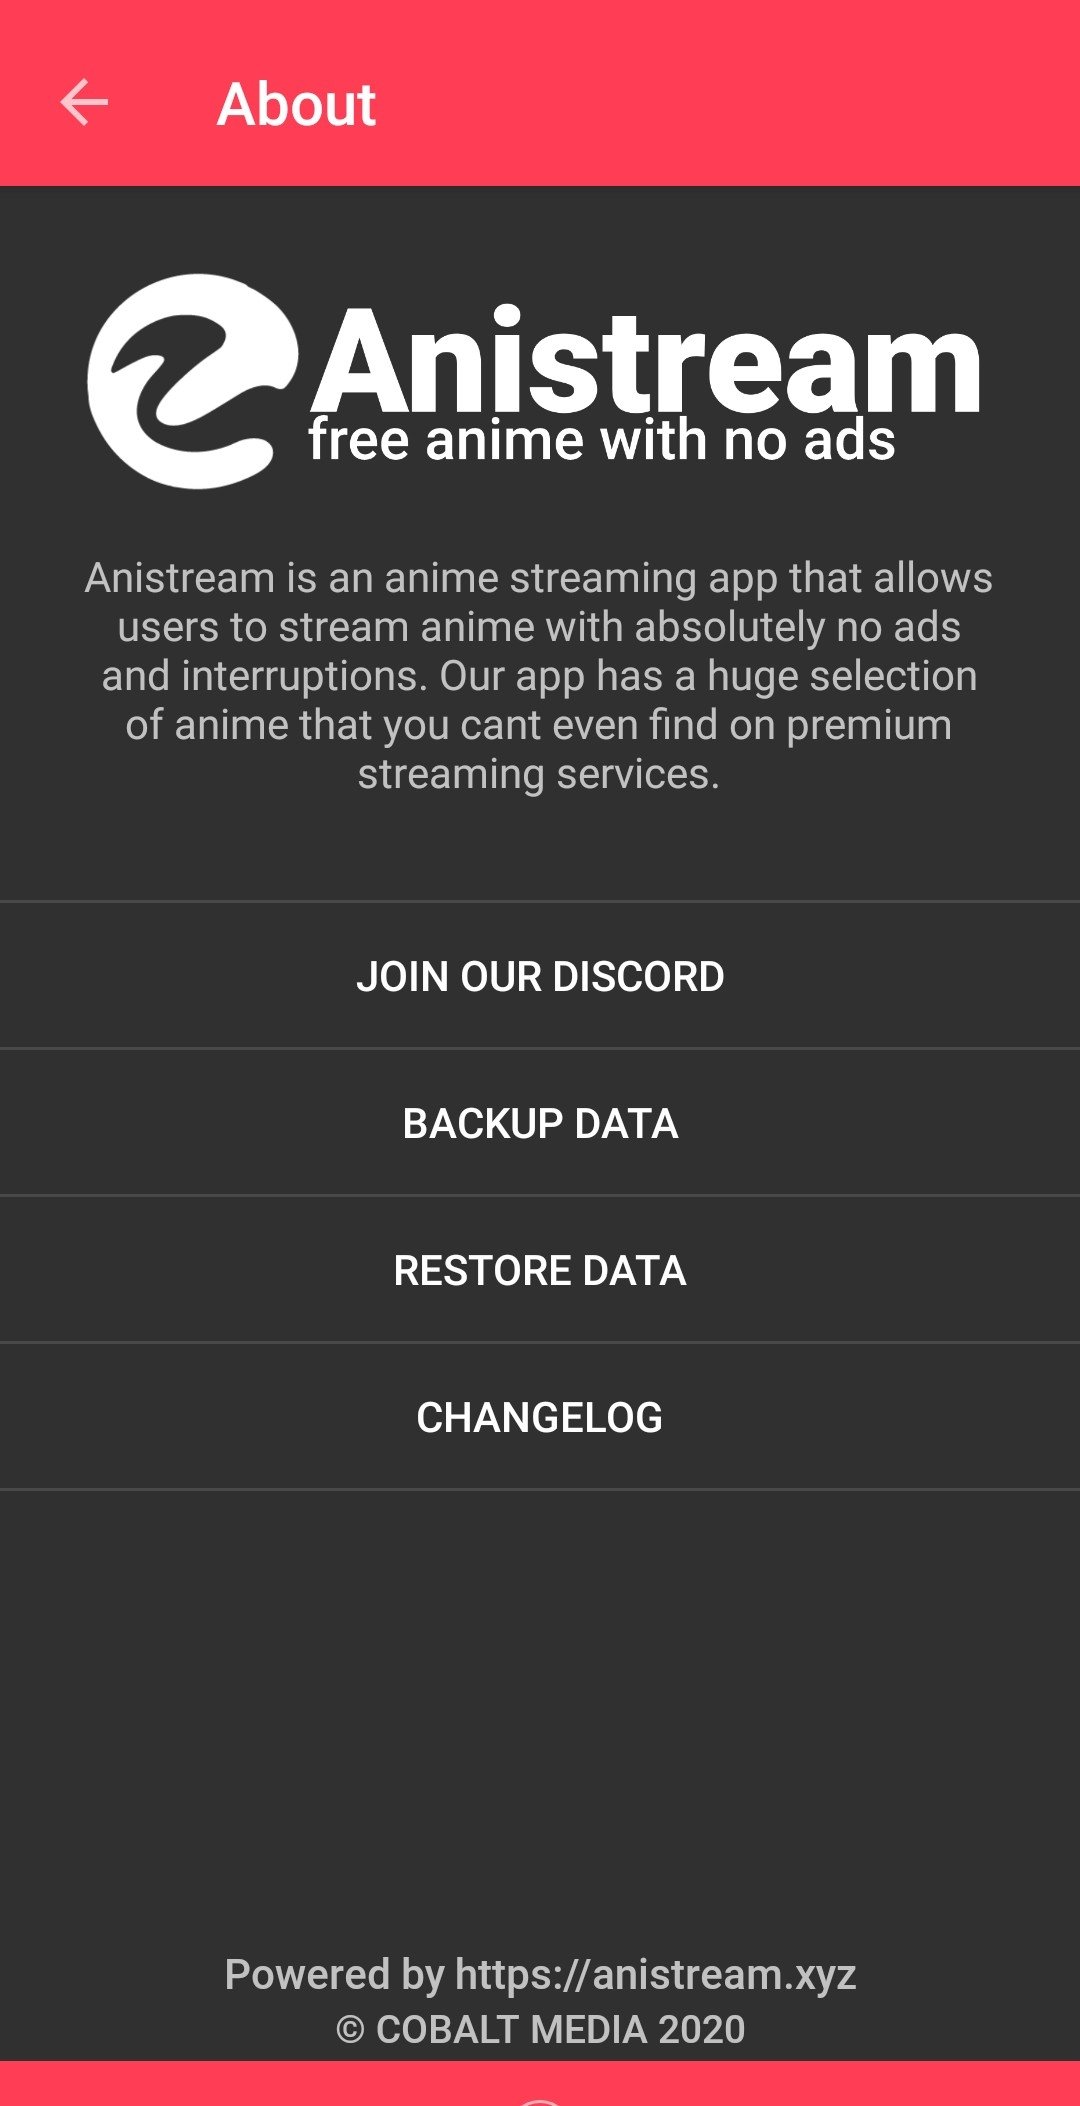 Anime APK Download for Android  Anime TV Shows and Movies